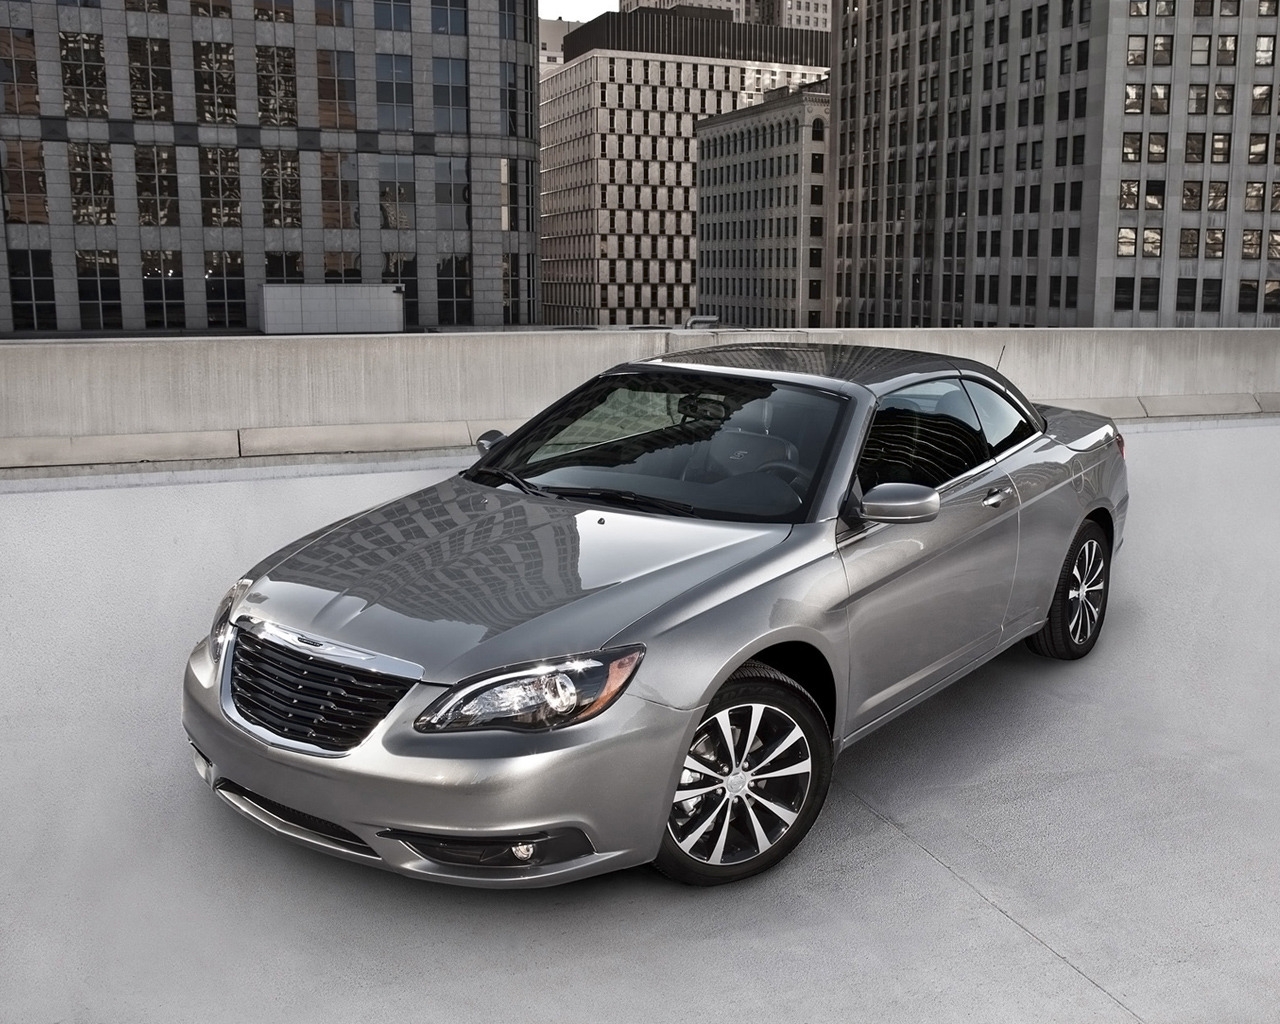 2011 Chrysler 200 S Convertible for 1280 x 1024 resolution